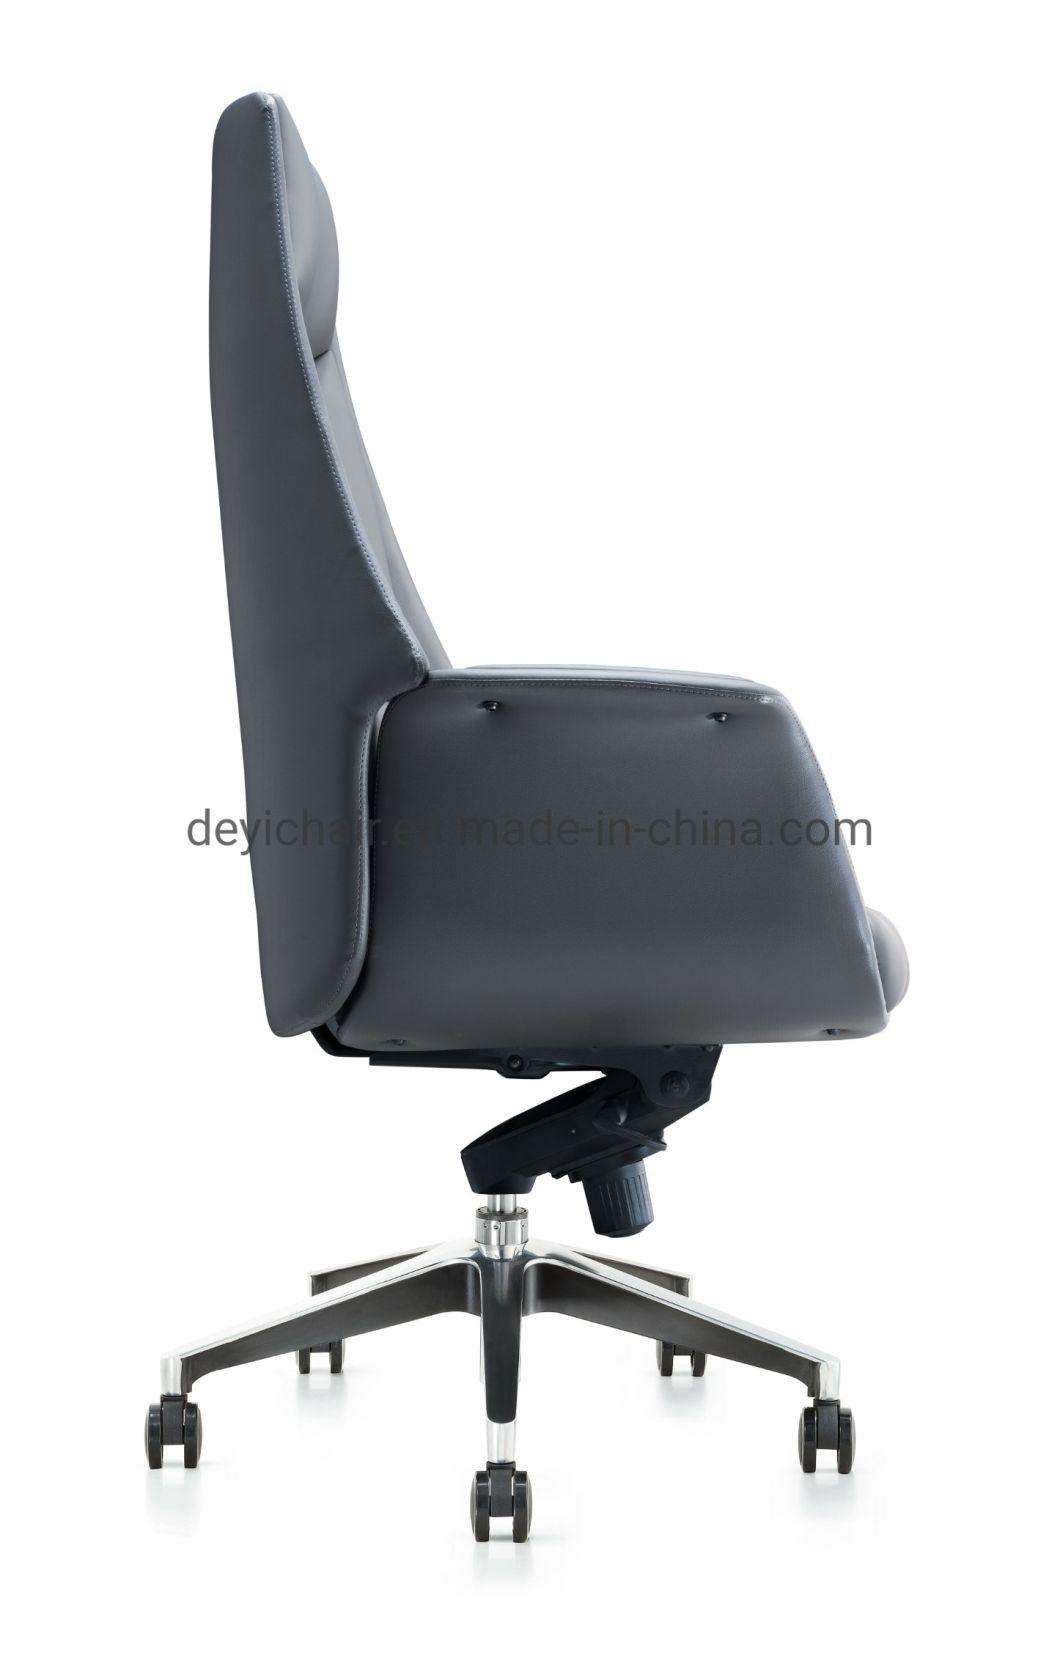 350mm Aluminum Base Black PU Castor Chromed Gas Lift PU / Leather Upholstery for Seat and Back Executive Chair